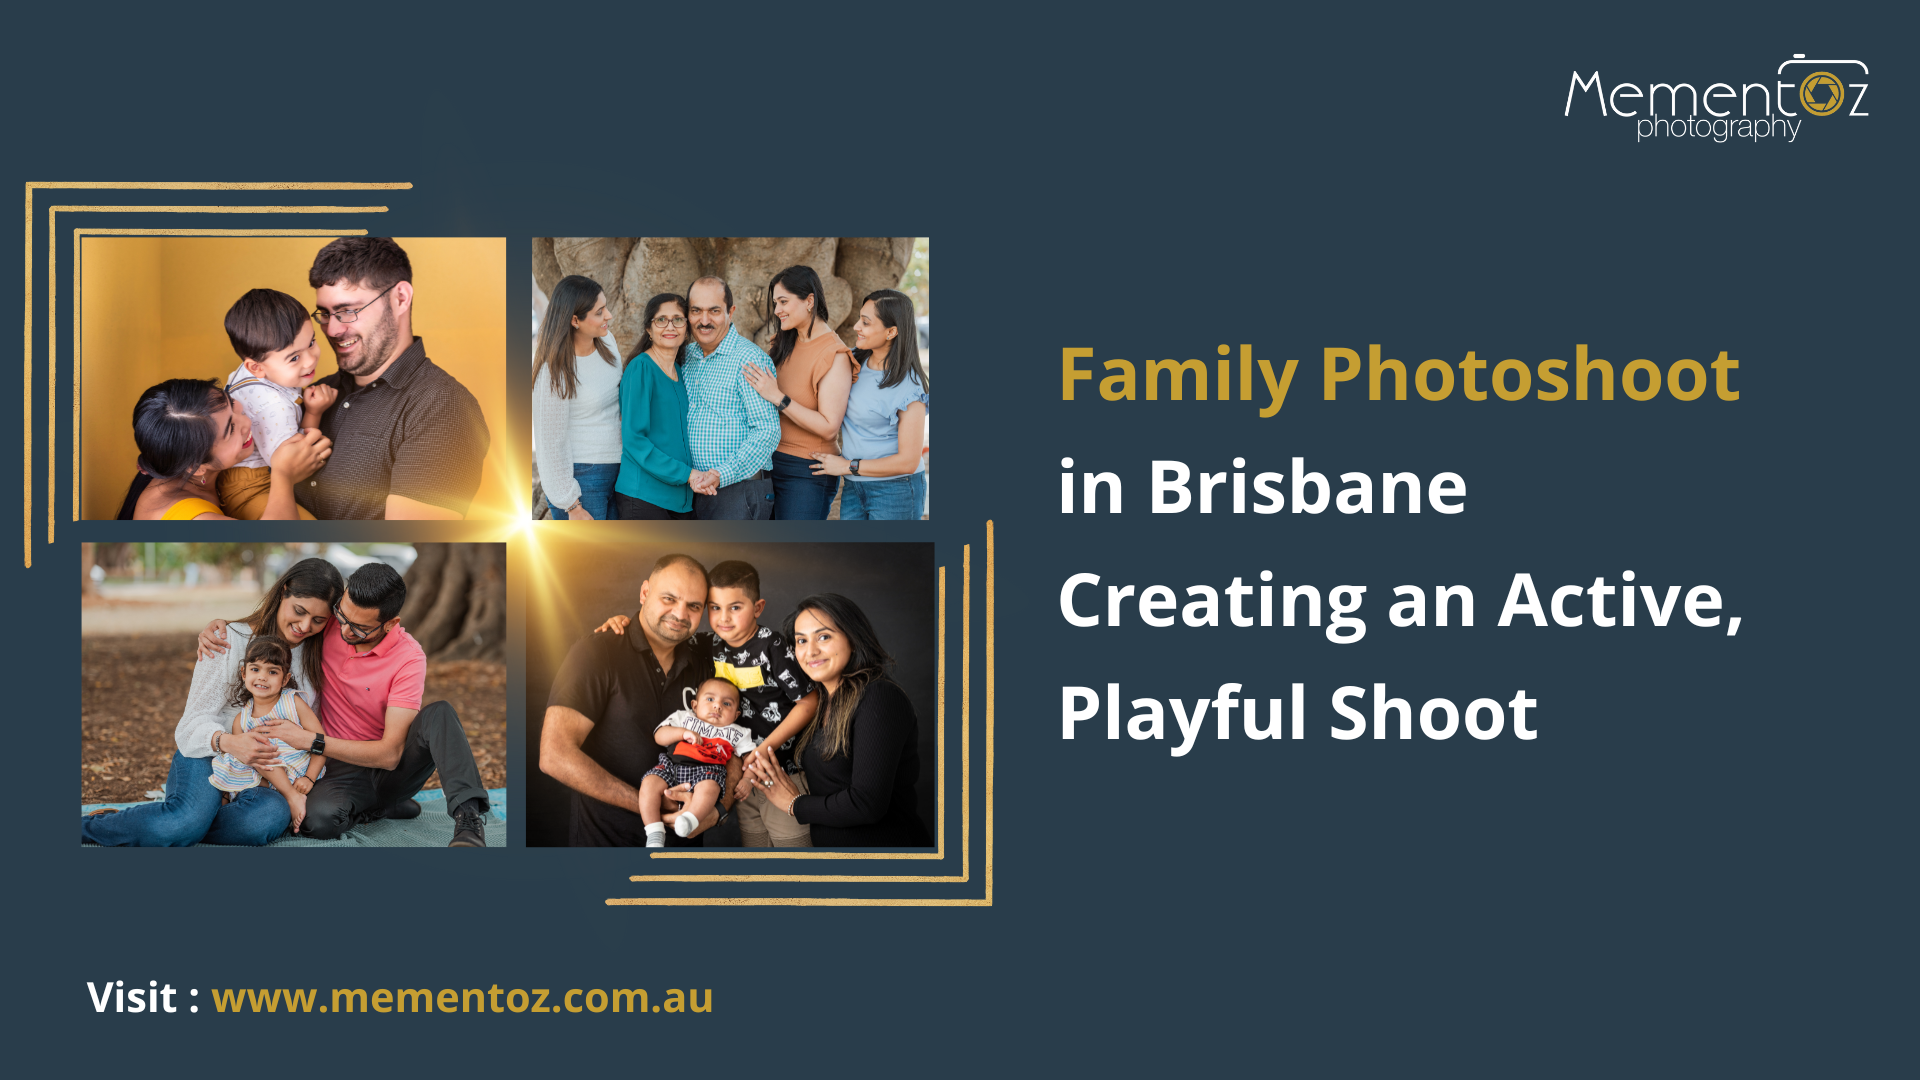 Family Photoshoot in Brisbane- Creating an Active, Playful Shoot